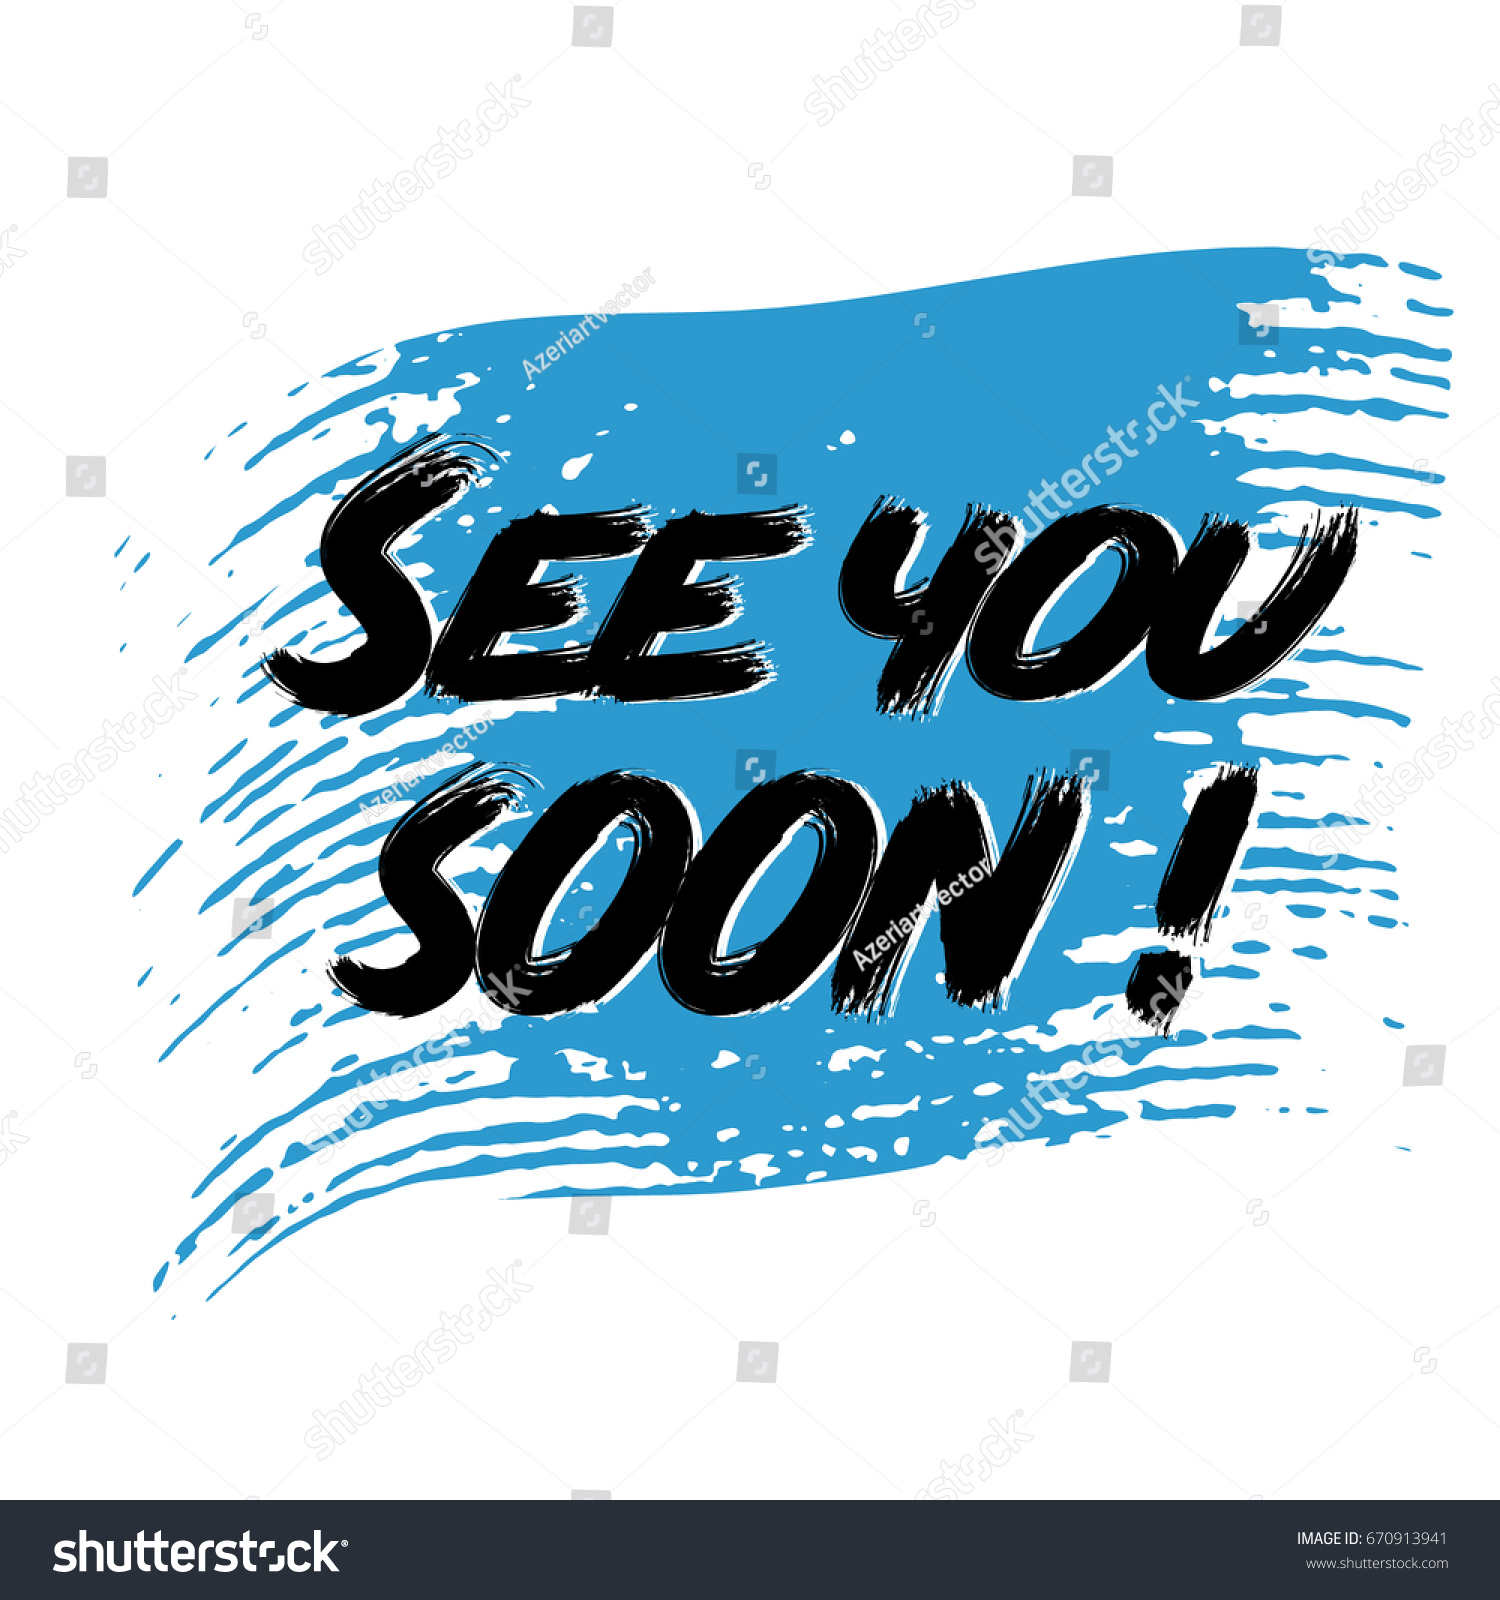 See You Soon Modern Black See Stock Vector 670913941 ...